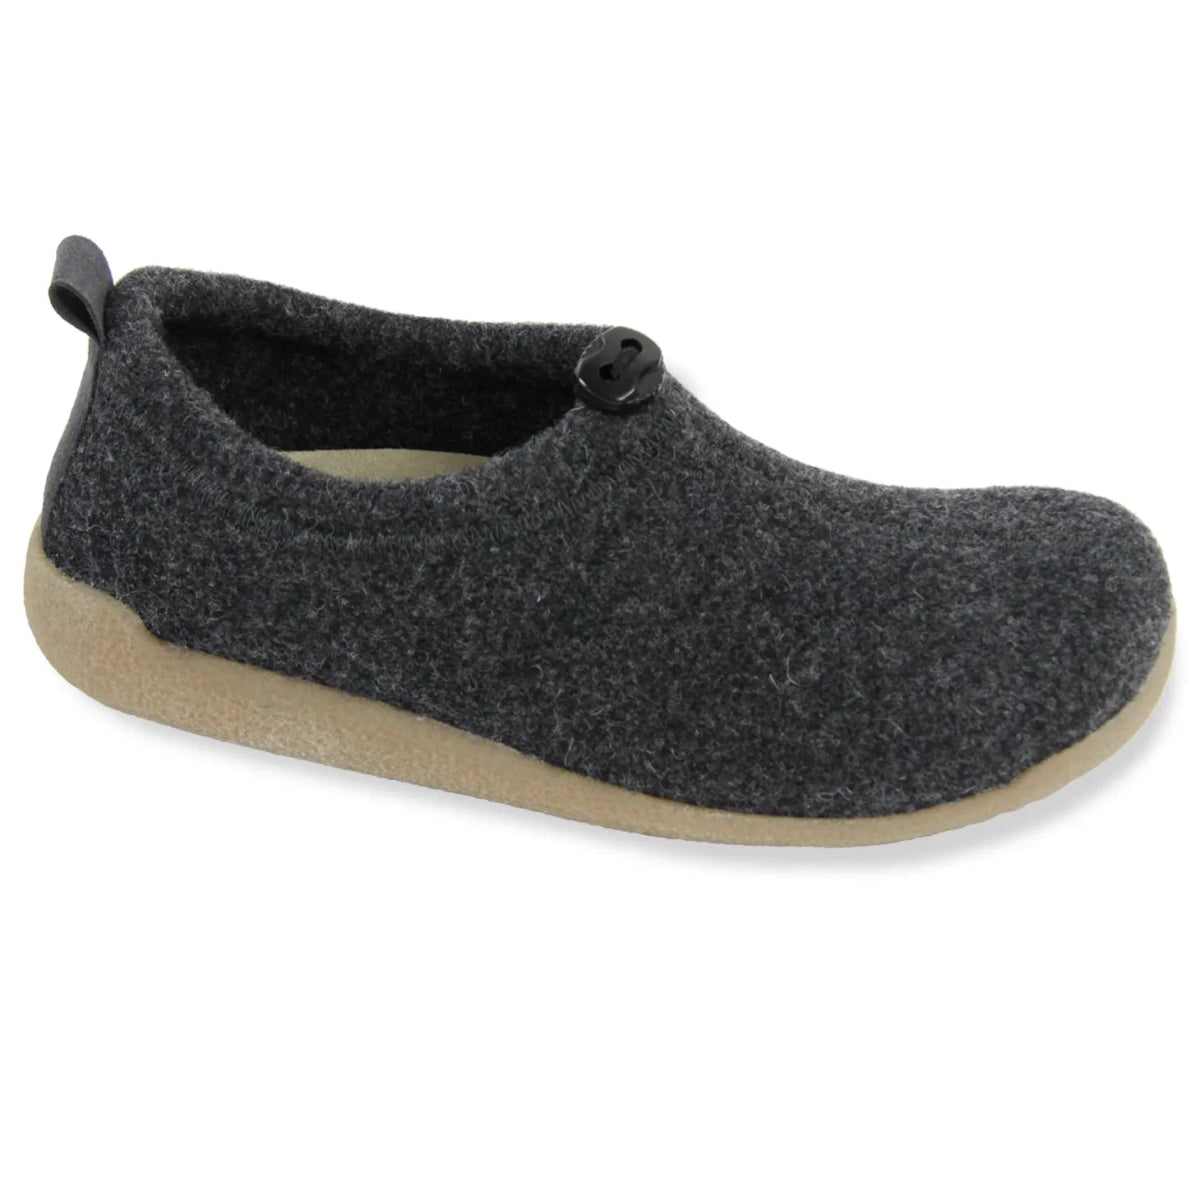 SANITA LODGE SHOE SLIPPERS UNISEX IN CHARCOAL - TLW Shoes